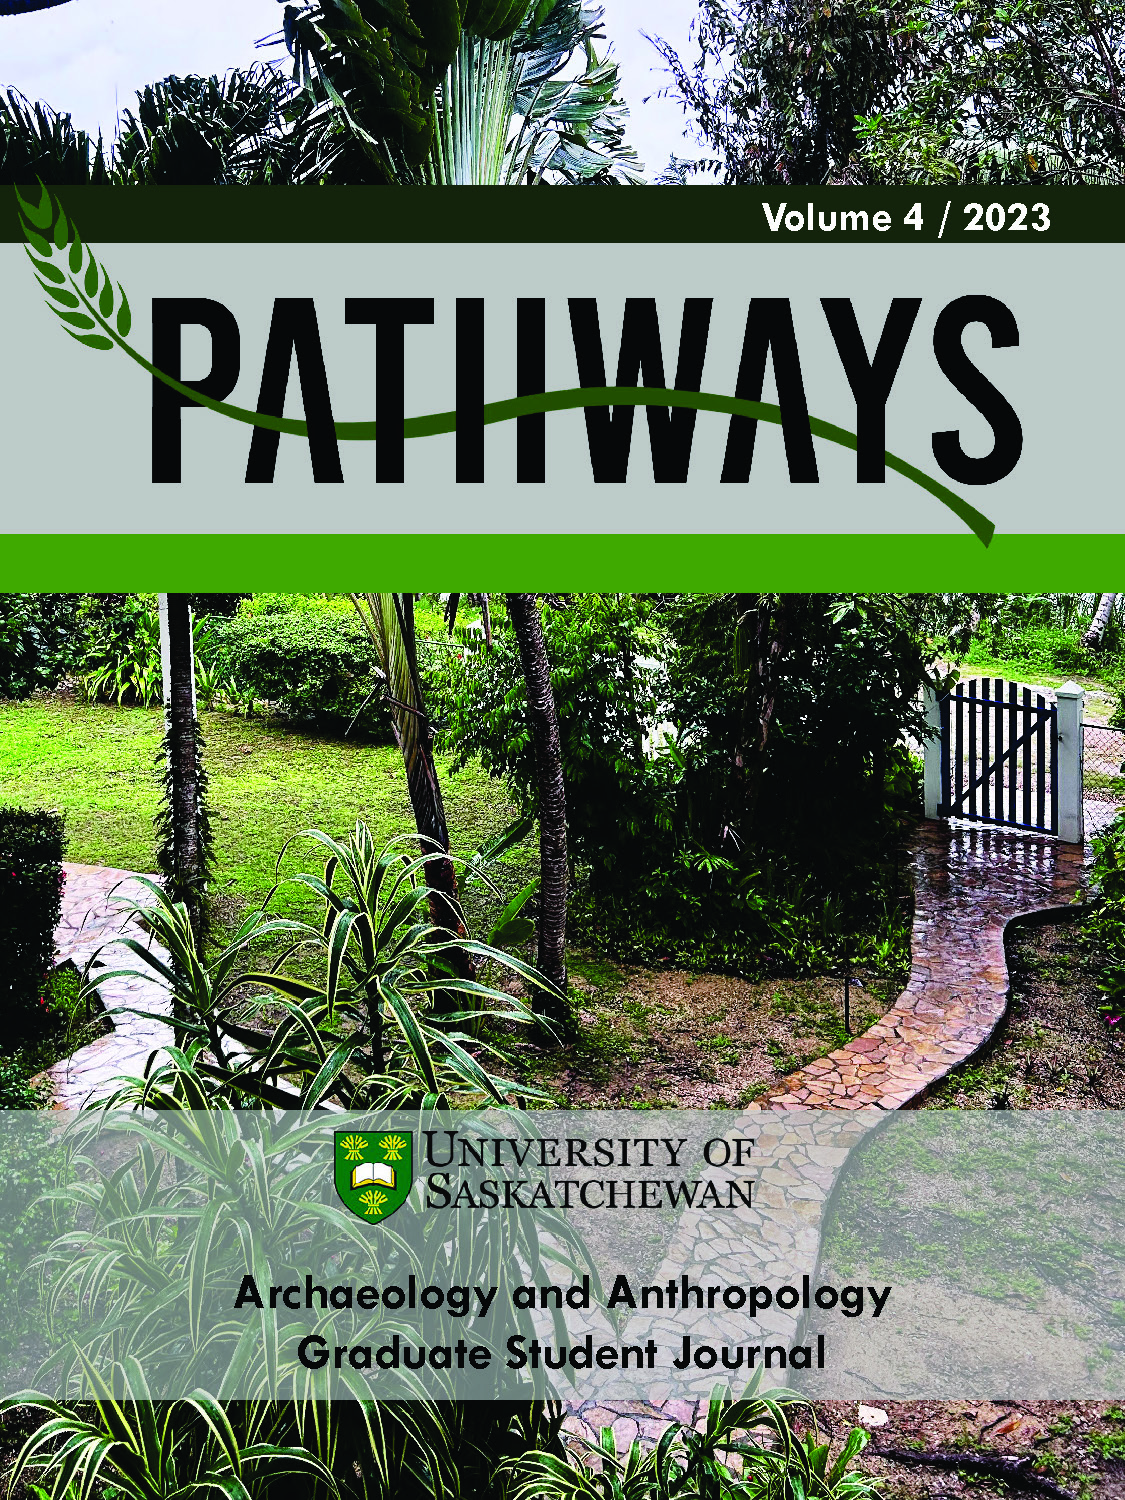 Pathways Volume 4 Cover: photo depicts stone path with gate